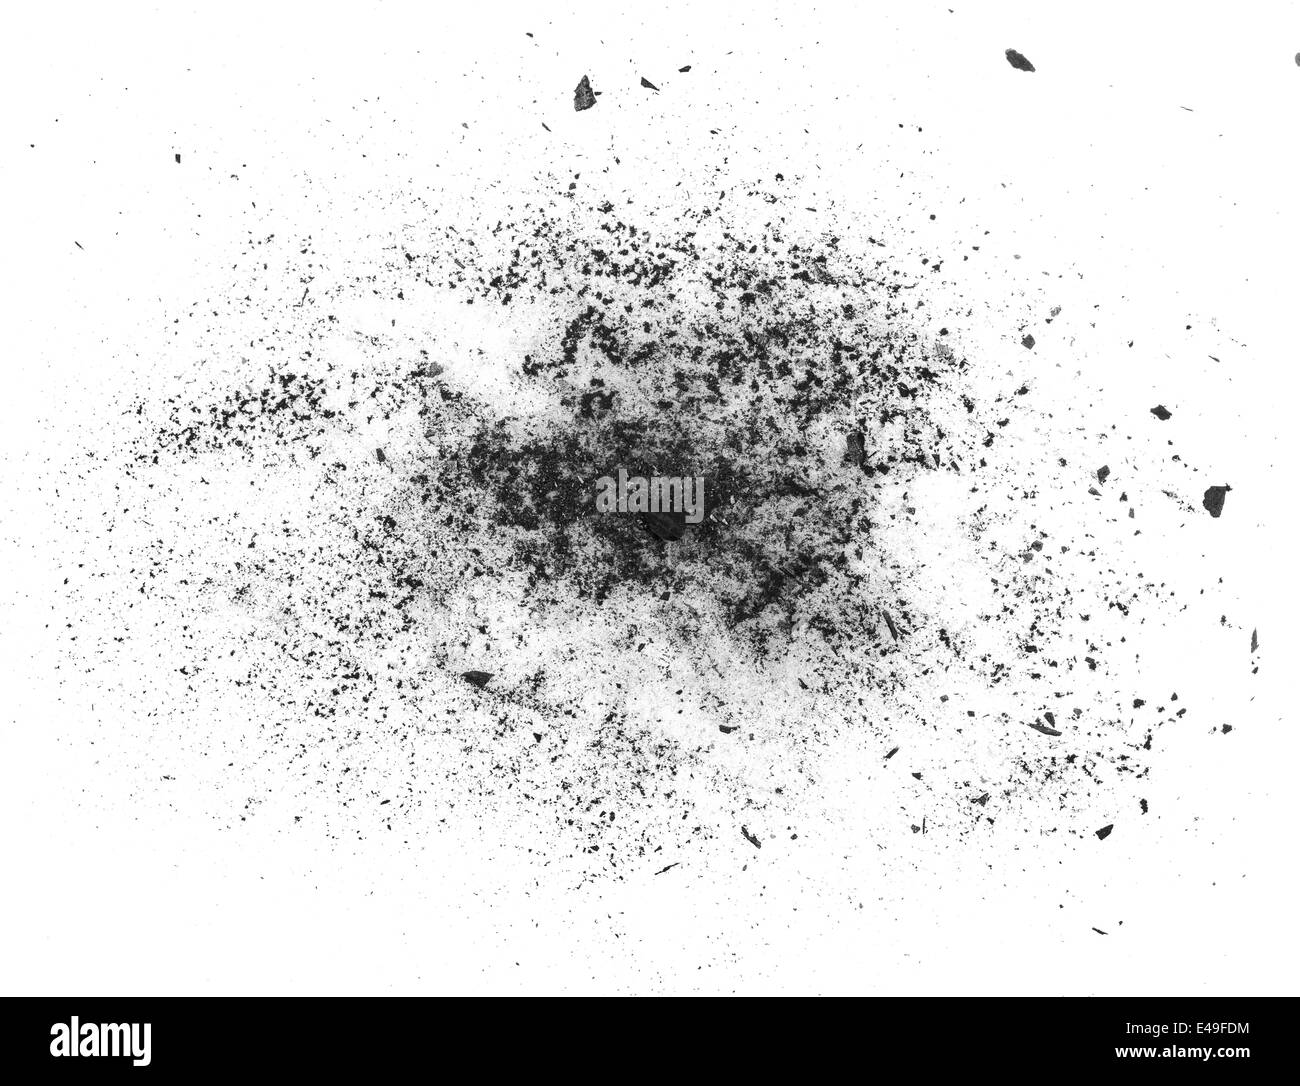 particles of charcoal on a white background Stock Photo